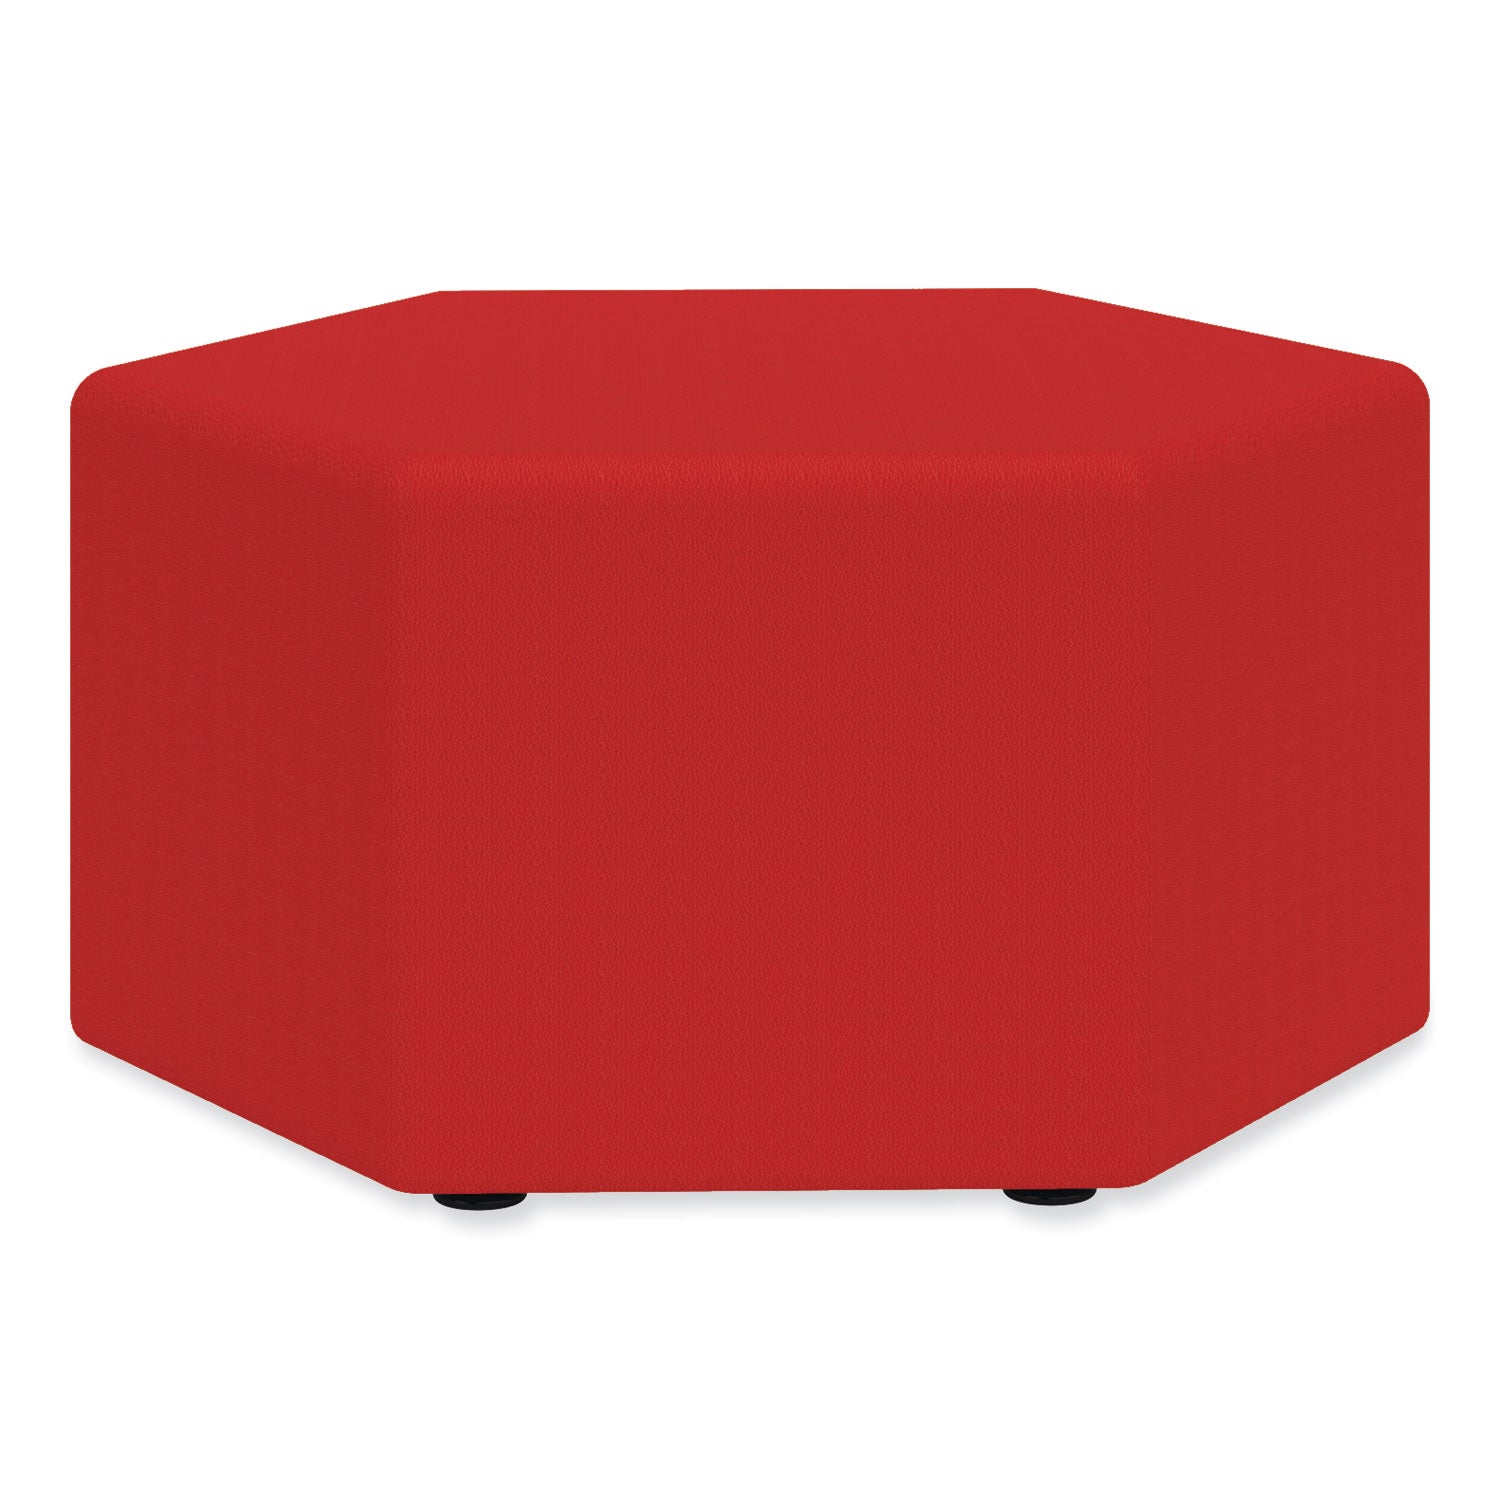 learn-30-hexagon-vinyl-ottoman-30w-x-30d-x-18h-red-ships-in-1-3-business-days_saf8124rv - 1